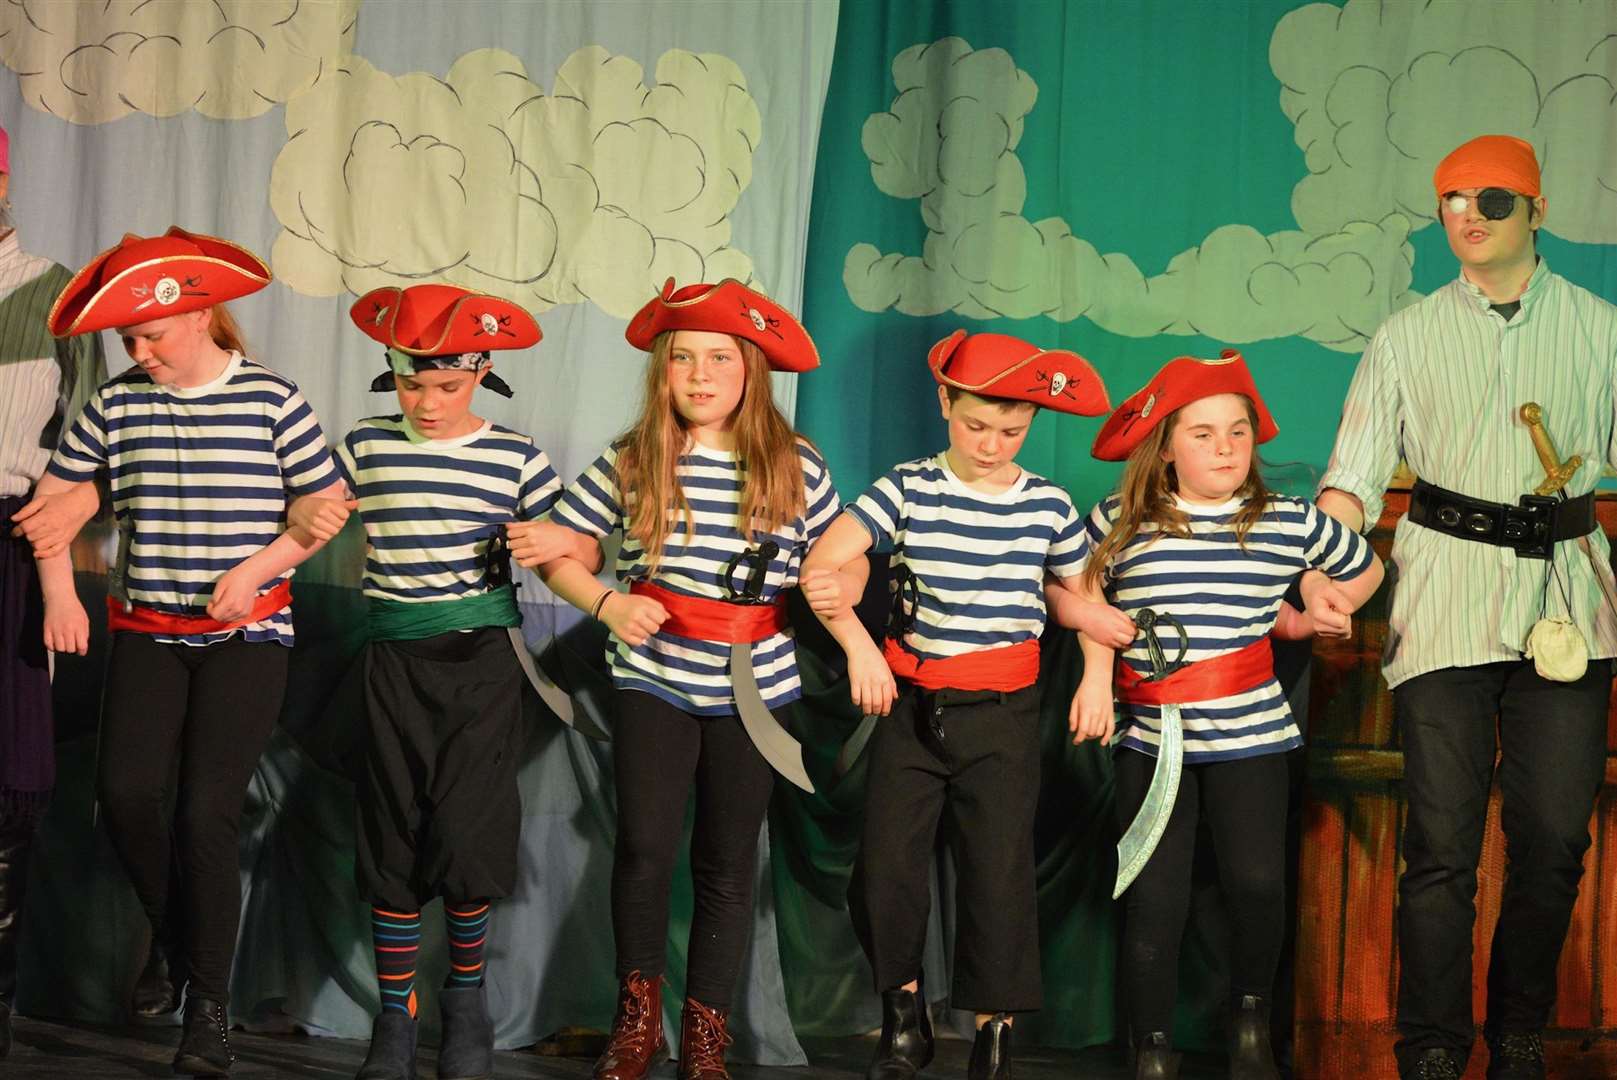 Salty Sam, Jolly Roger, Cut-Throat Kate, Jack Tar, Rascal Rose and Blind Ali dance to “You are a pirate” down on Scrabster Docks. Photo: Jim Johnston